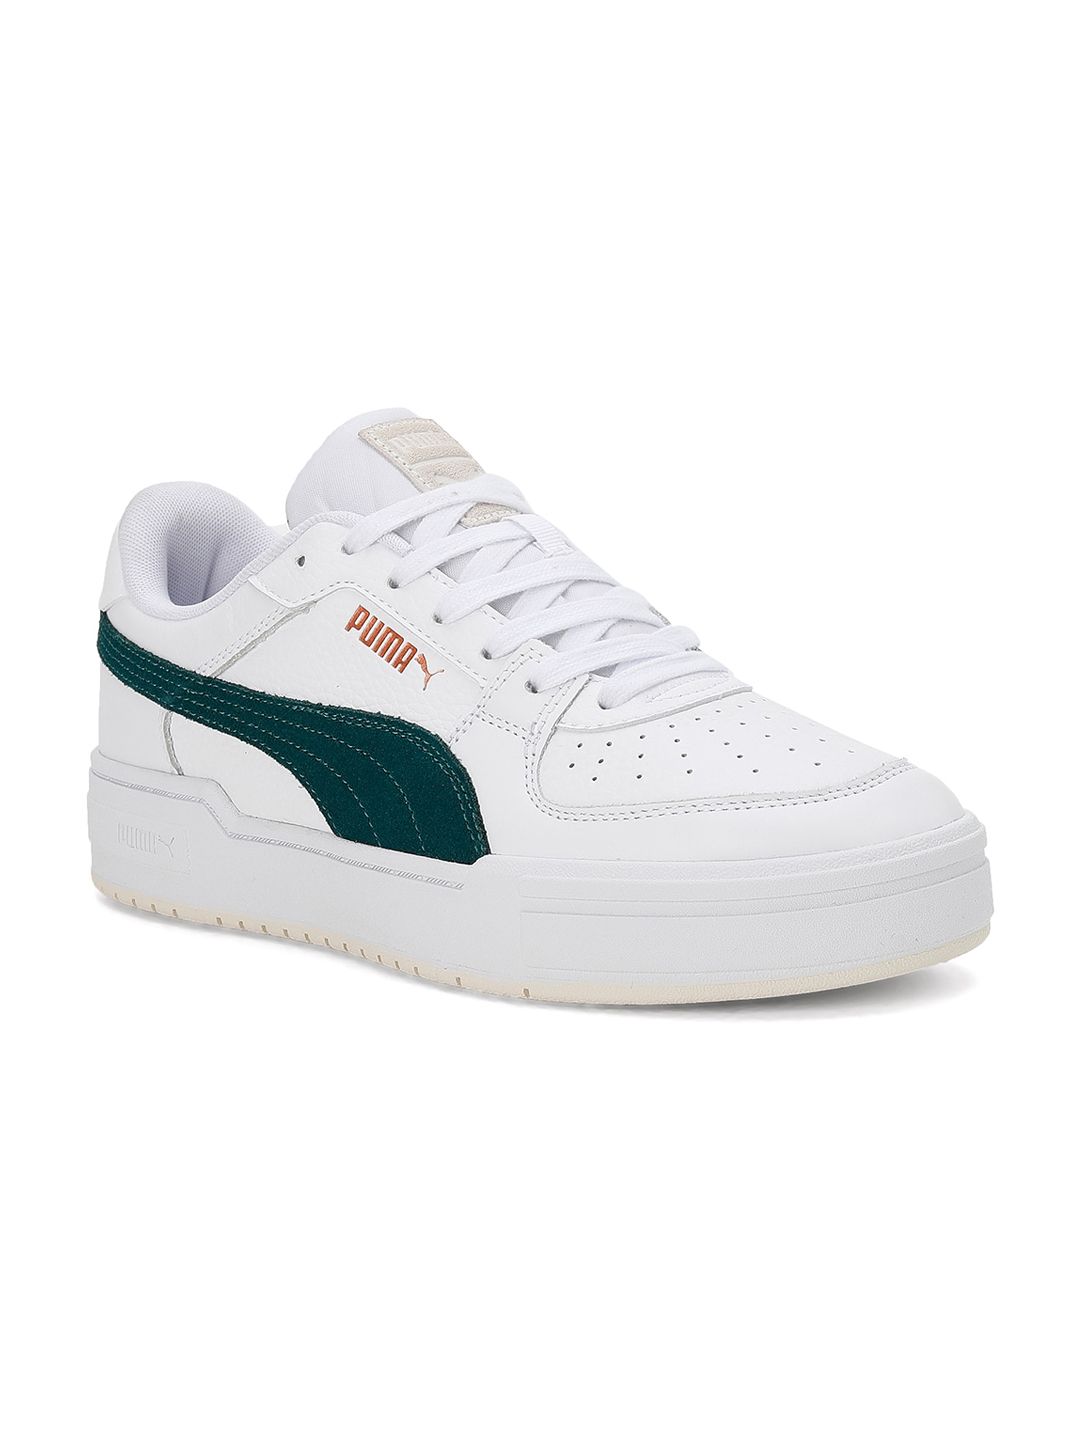 Puma White Perforations Leather CA Pro Suede FS Sneakers Price in India